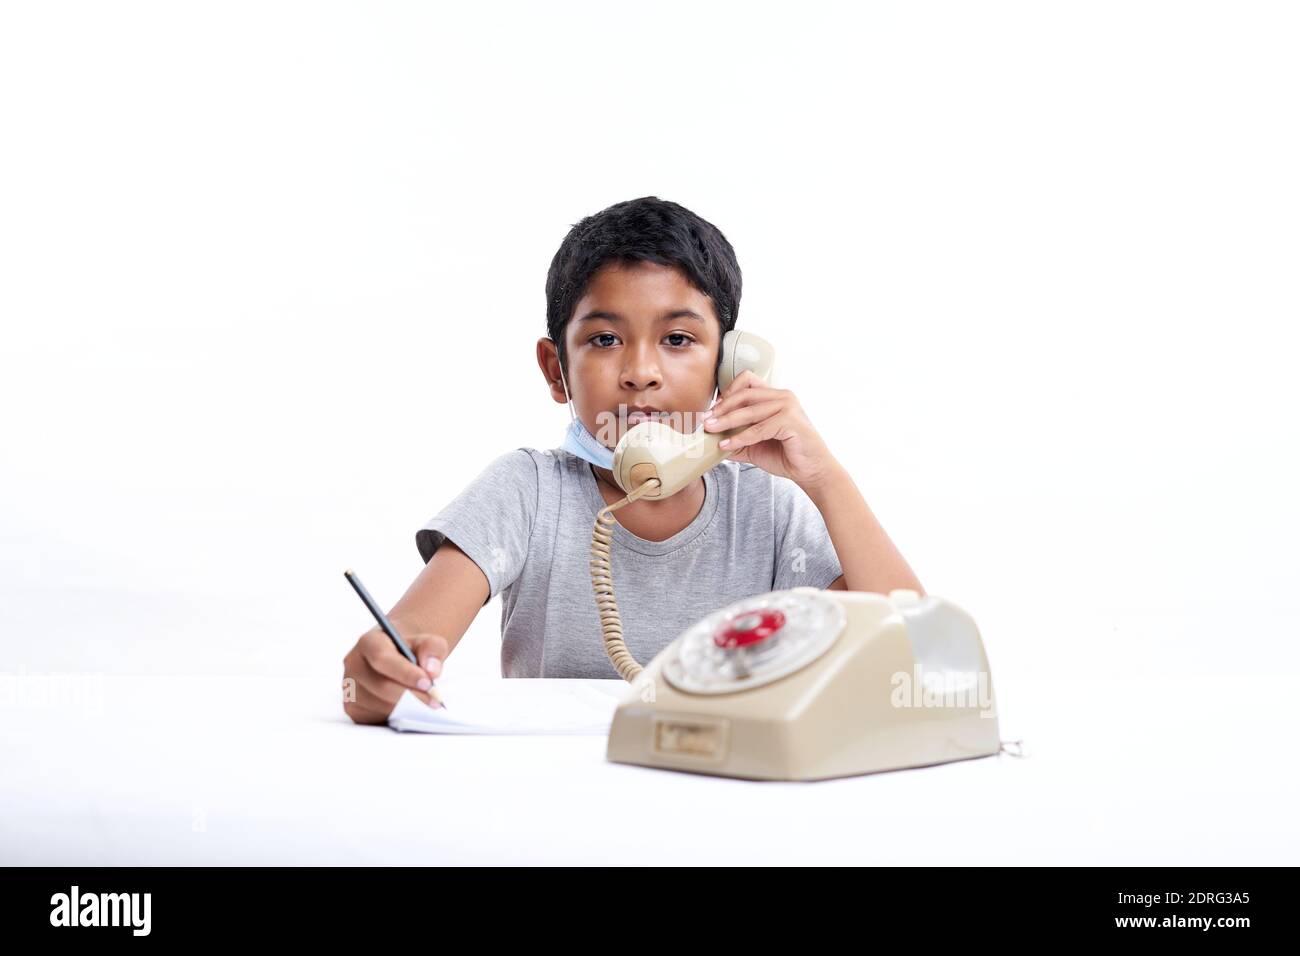 Young boy Talking on vintage telephone and making notes during online class at home Stock Photo